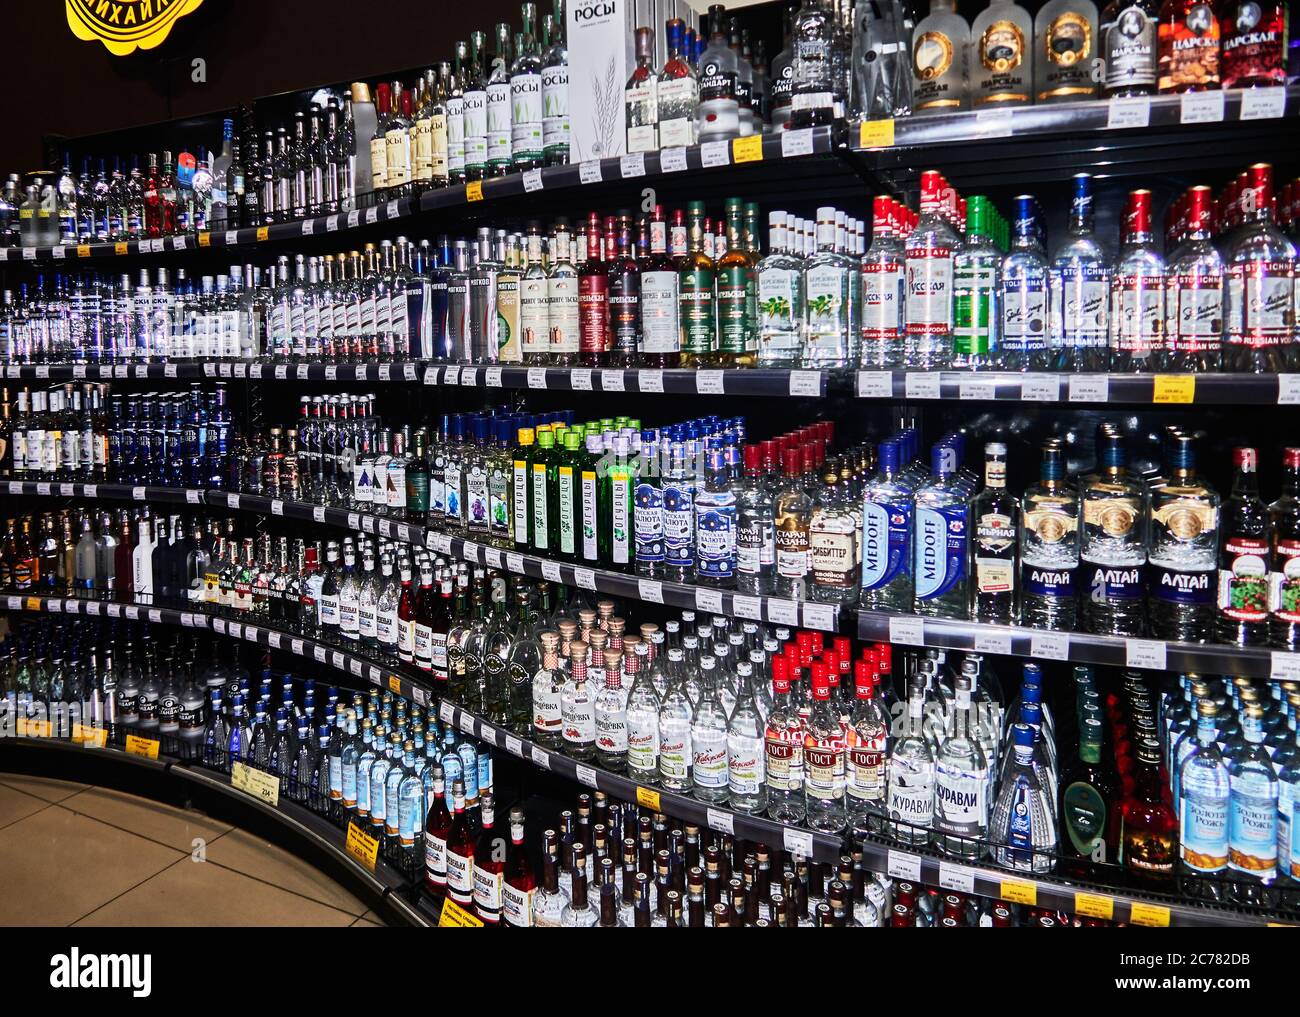 Russia,Astrakhan Oblast. Astrakhan city     the largest consumers of vodka in the world, drink an average of 14 liters per year. Many people in Russia piously believe that vodka does less harm to the drinker than other spirits, such as whiskey and cognac. Stock Photo